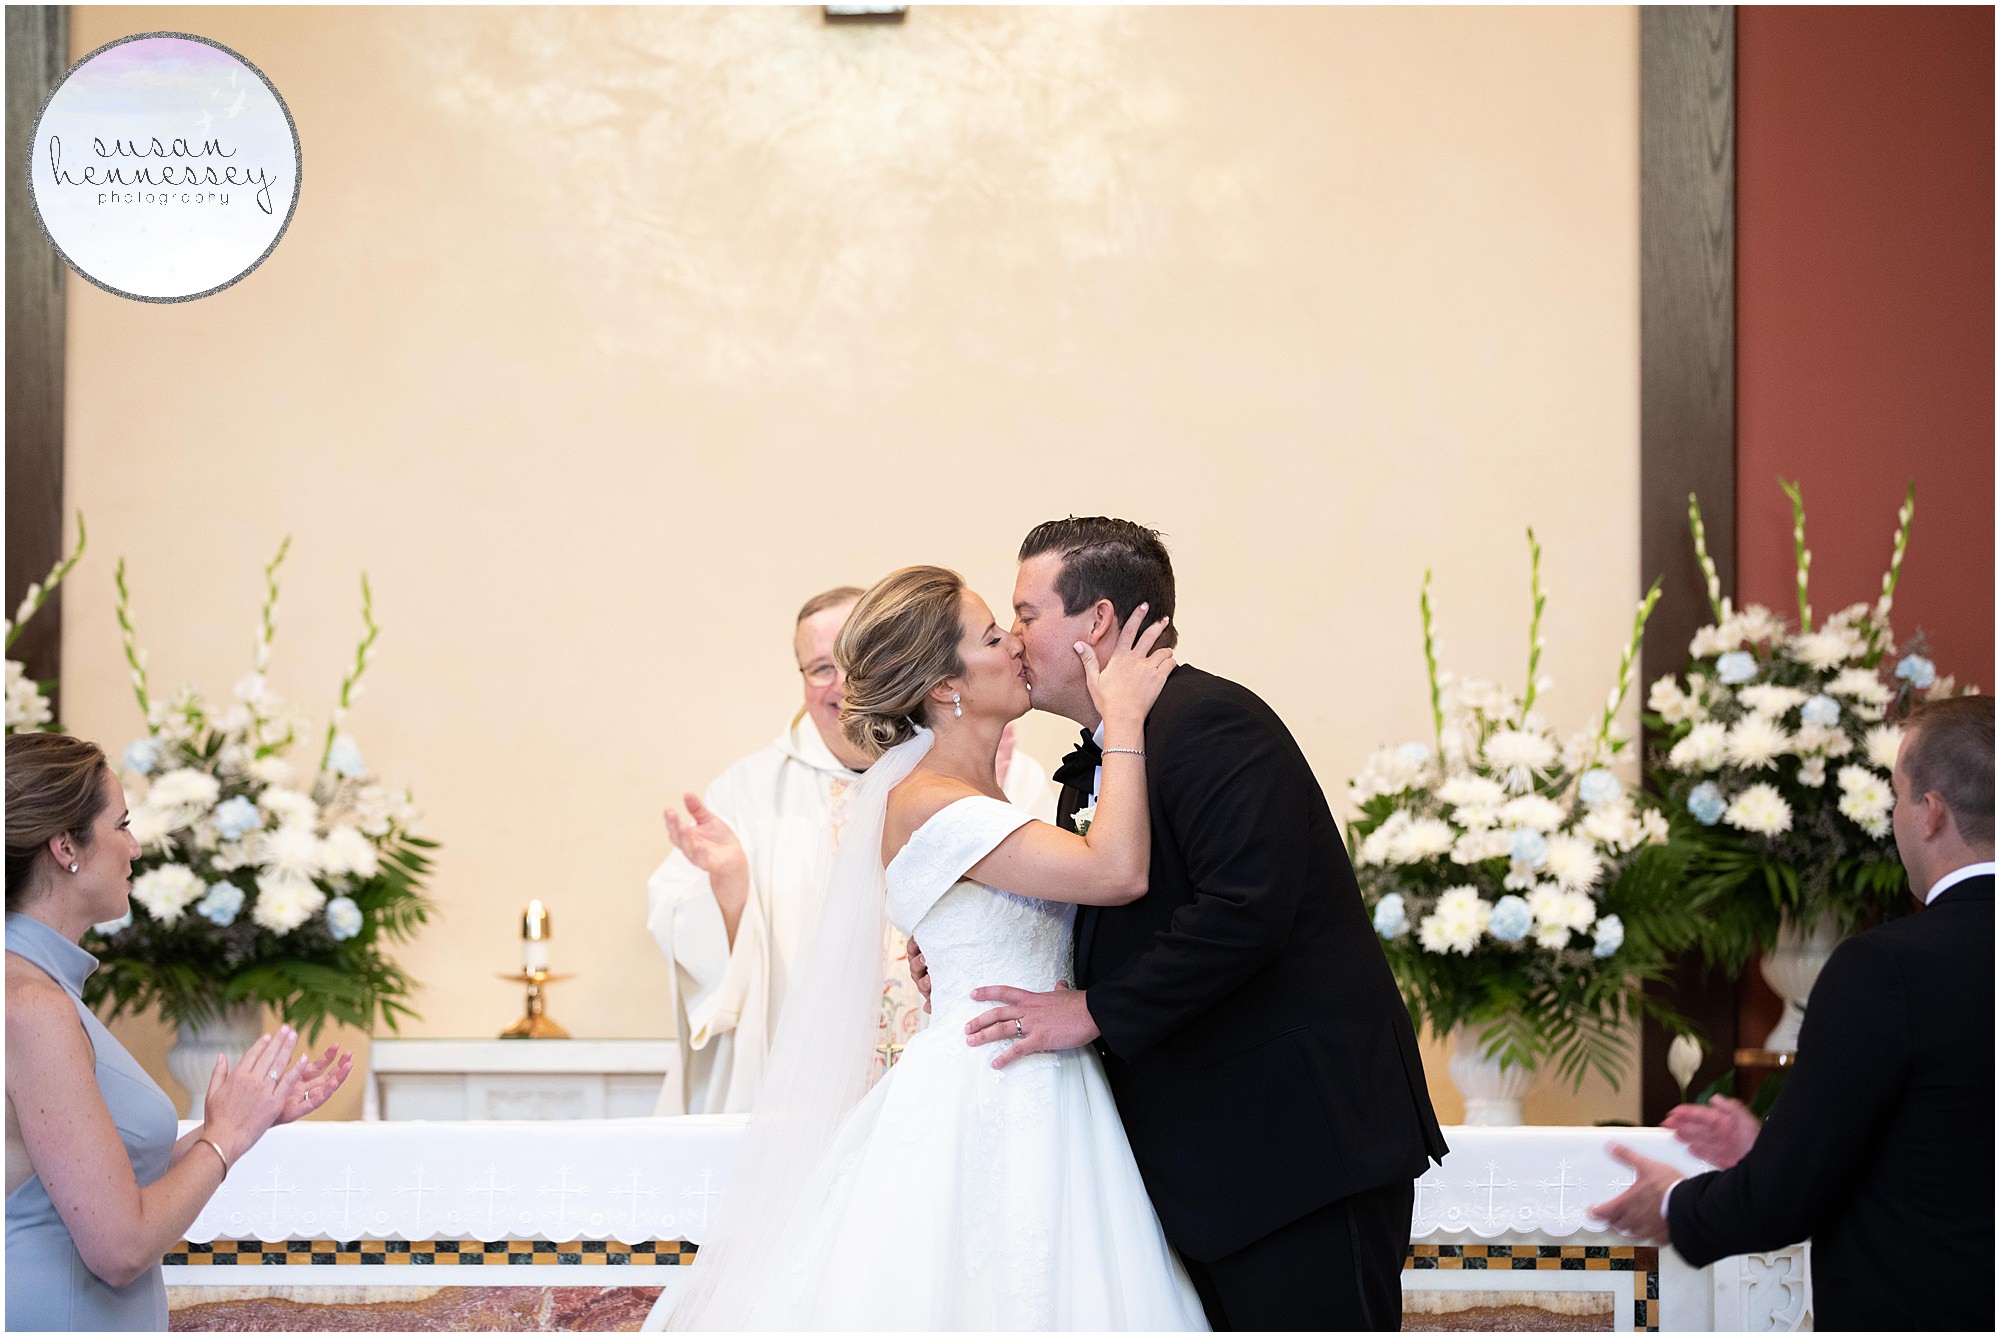 The bride and groom kiss for the first time at their Rehoboth Beach Country Club wedding